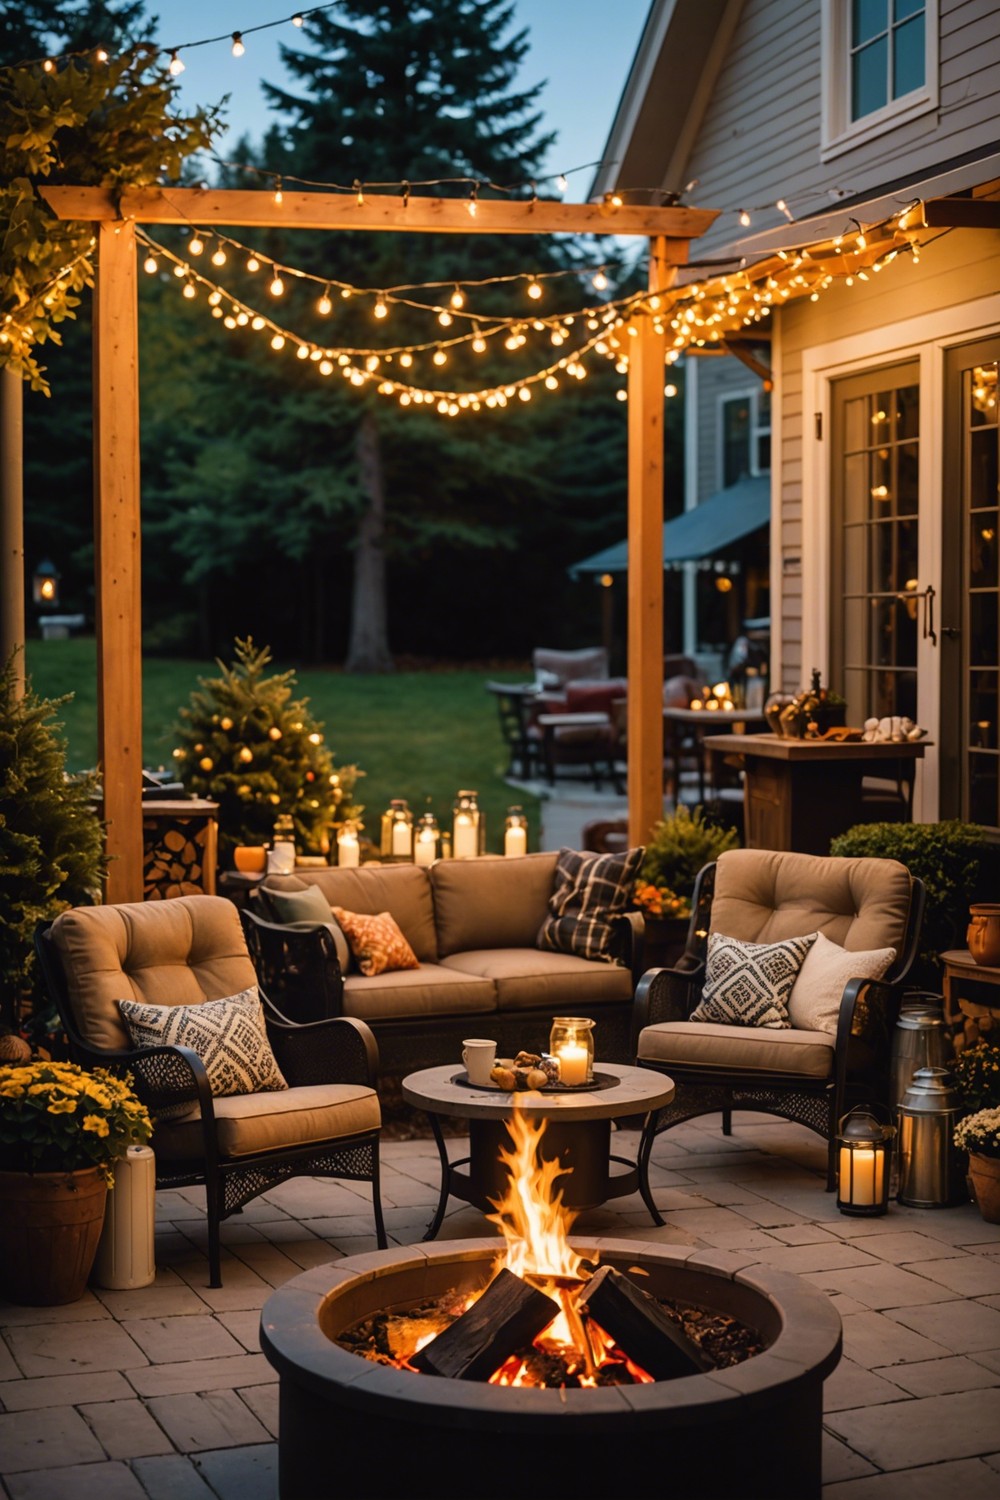 Outdoor Heating for Year-Round Use